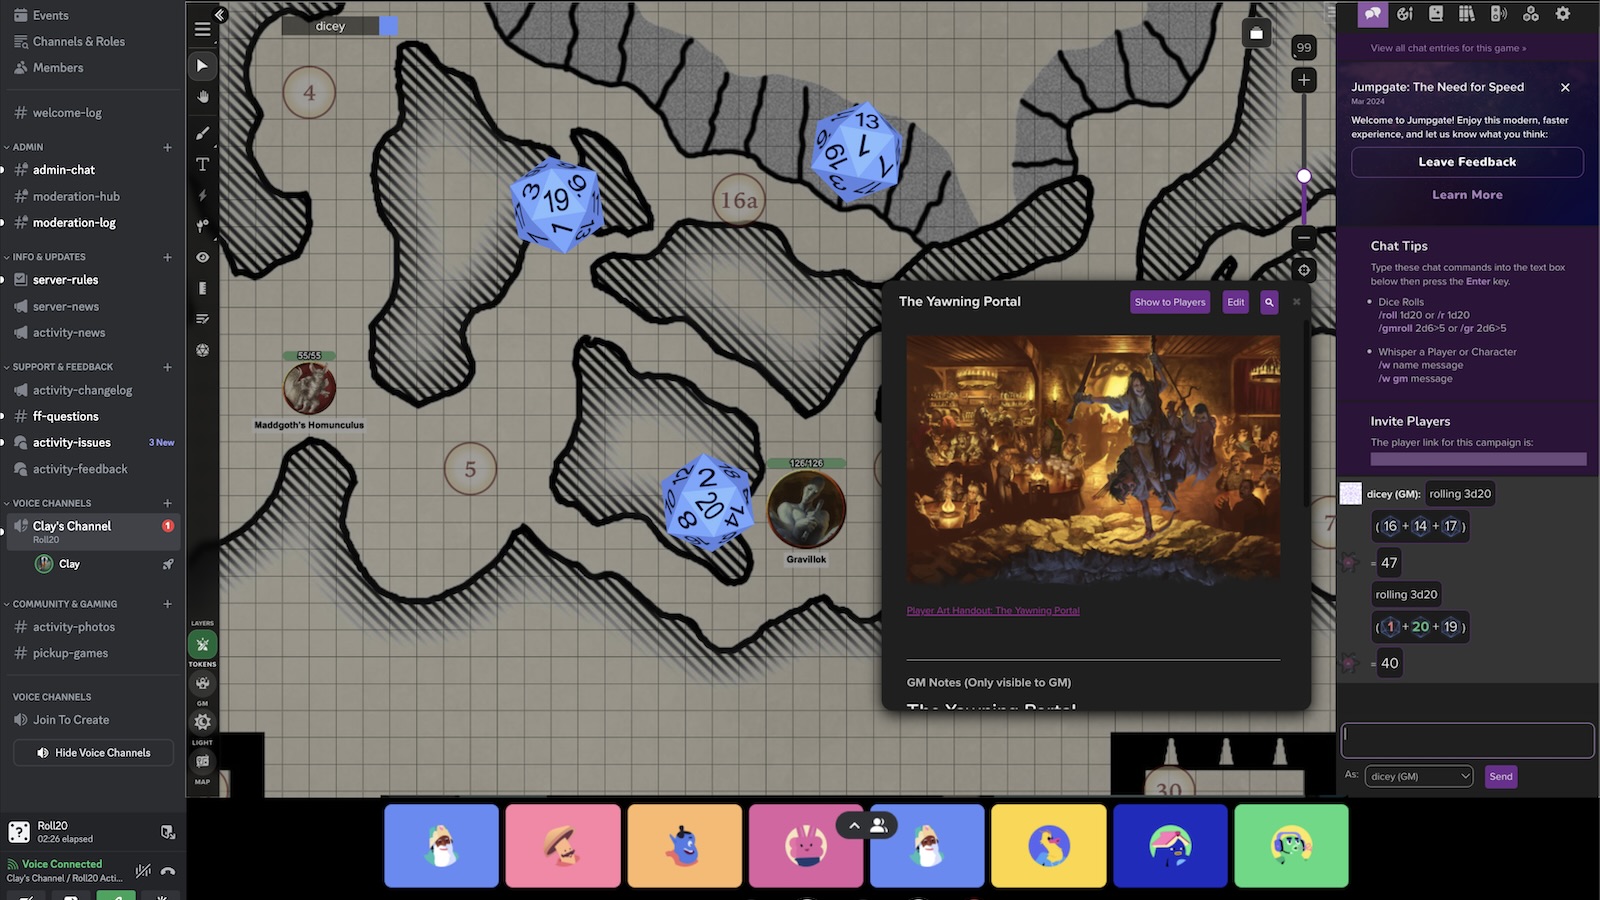 Beta version of the Roll20 Discord Activity in use